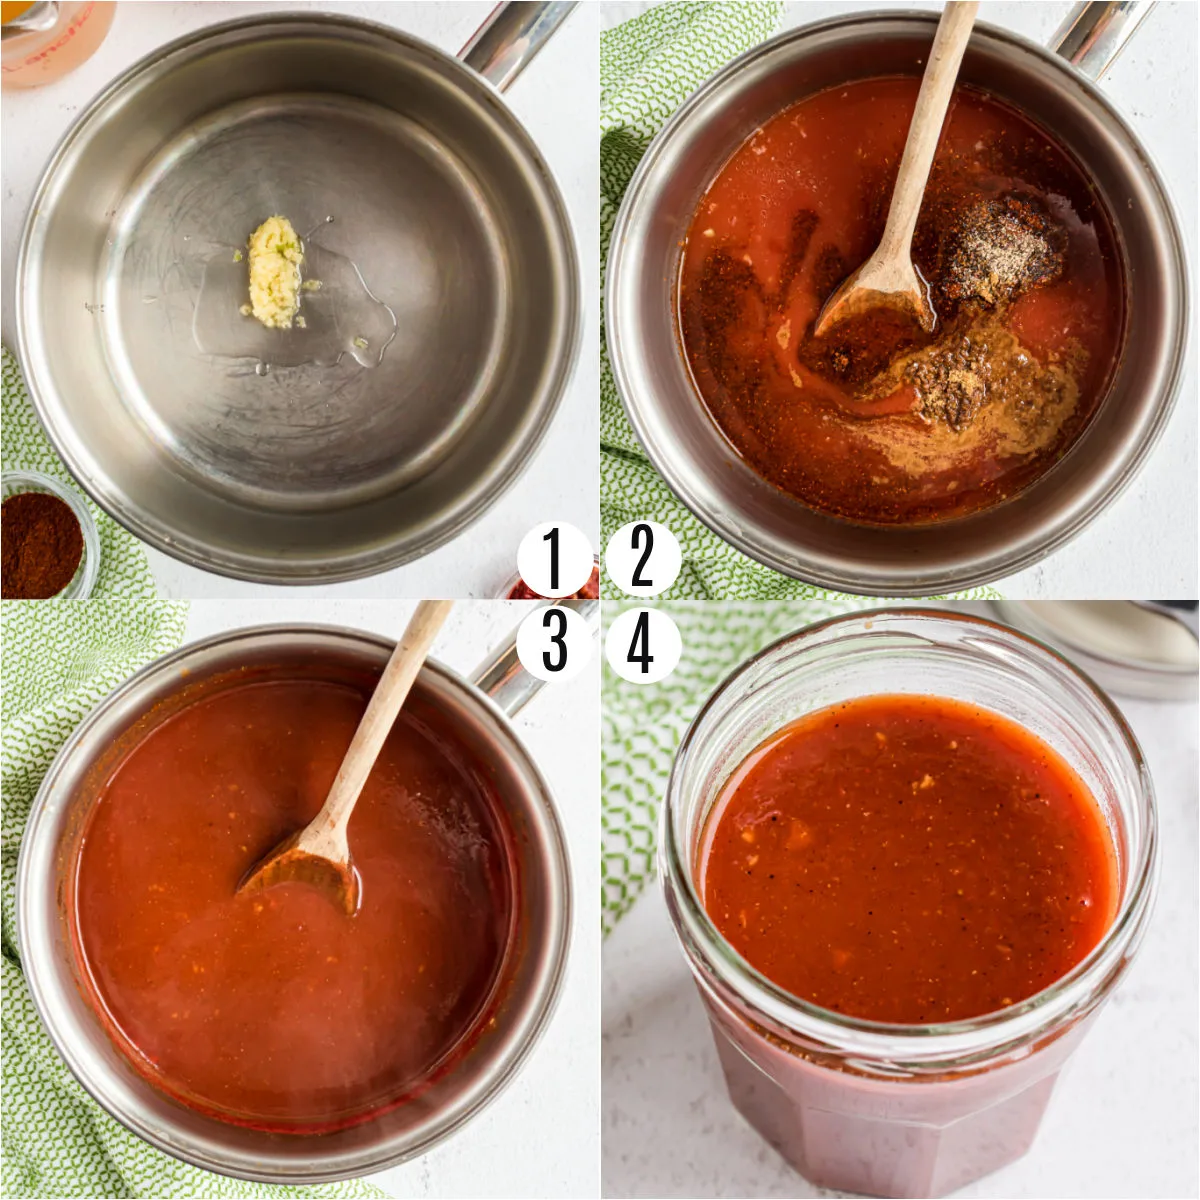 Step by step photos showing how to make sugar free enchilada sauce.